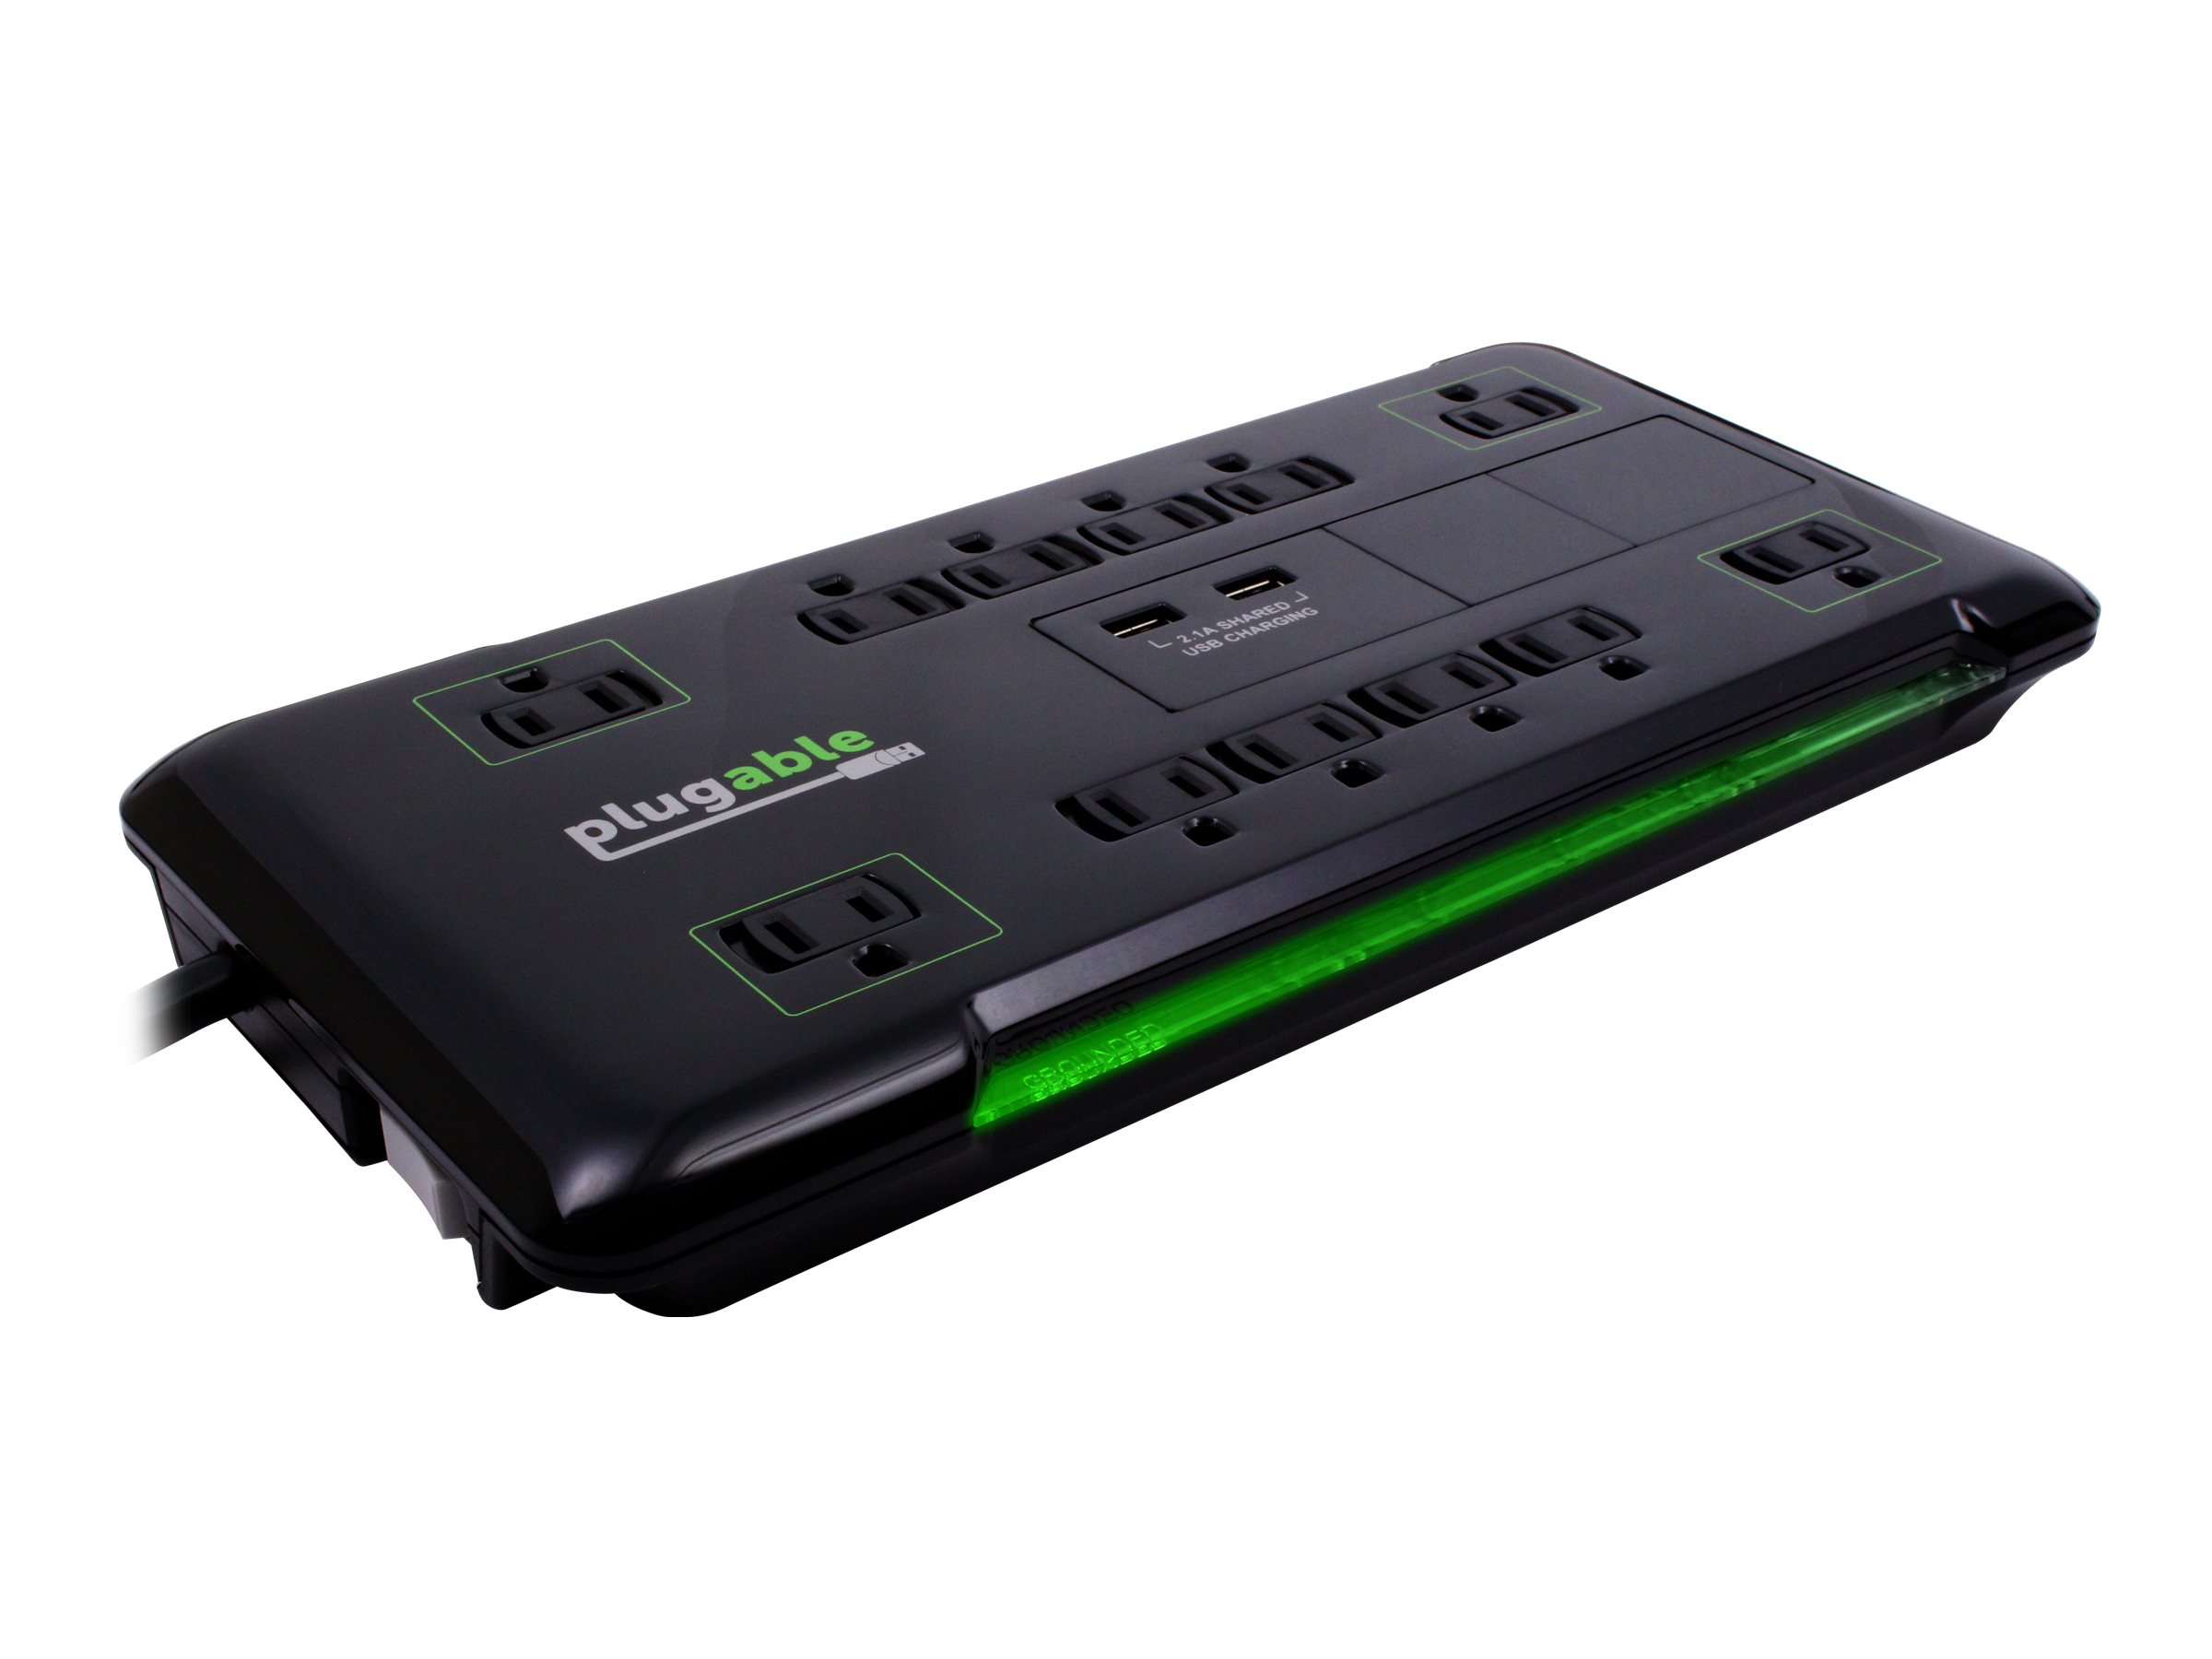 Plugable Surge Protector Power Strip with USB and 12 AC Outlets, Built-in 10.5W 2-Port USB Charger for Android, Apple iOS, and Windows Mobile Devices, 6 Foot Extension Cord - image 1 of 5